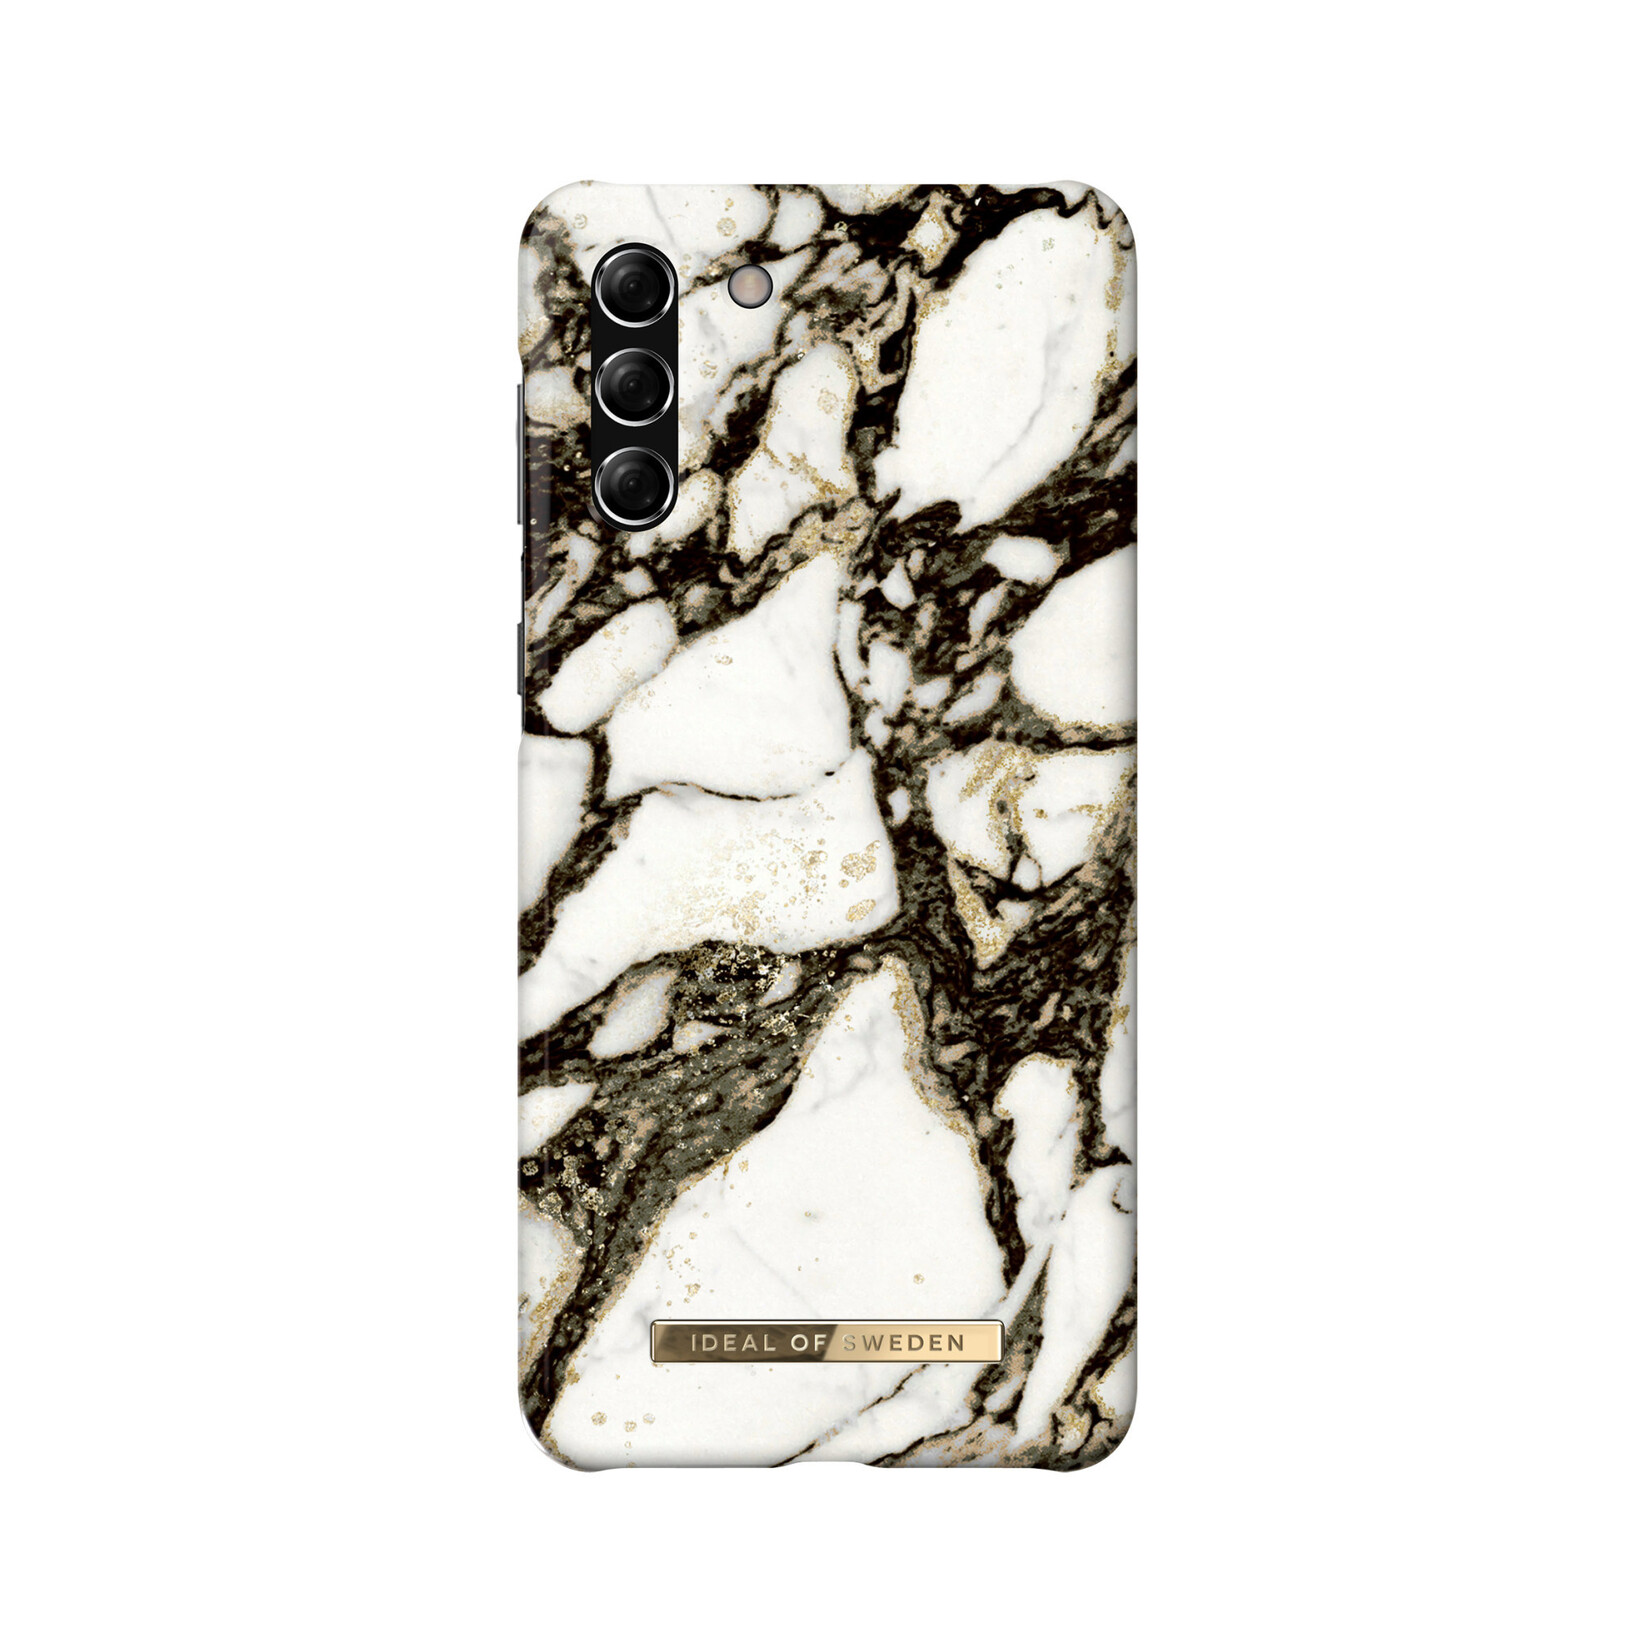 iDeal of Sweden iDeal of Sweden hoesje voor Galaxy S21 Plus - Hardcase Backcover - Fashion Case - Calacatta Golden Marble